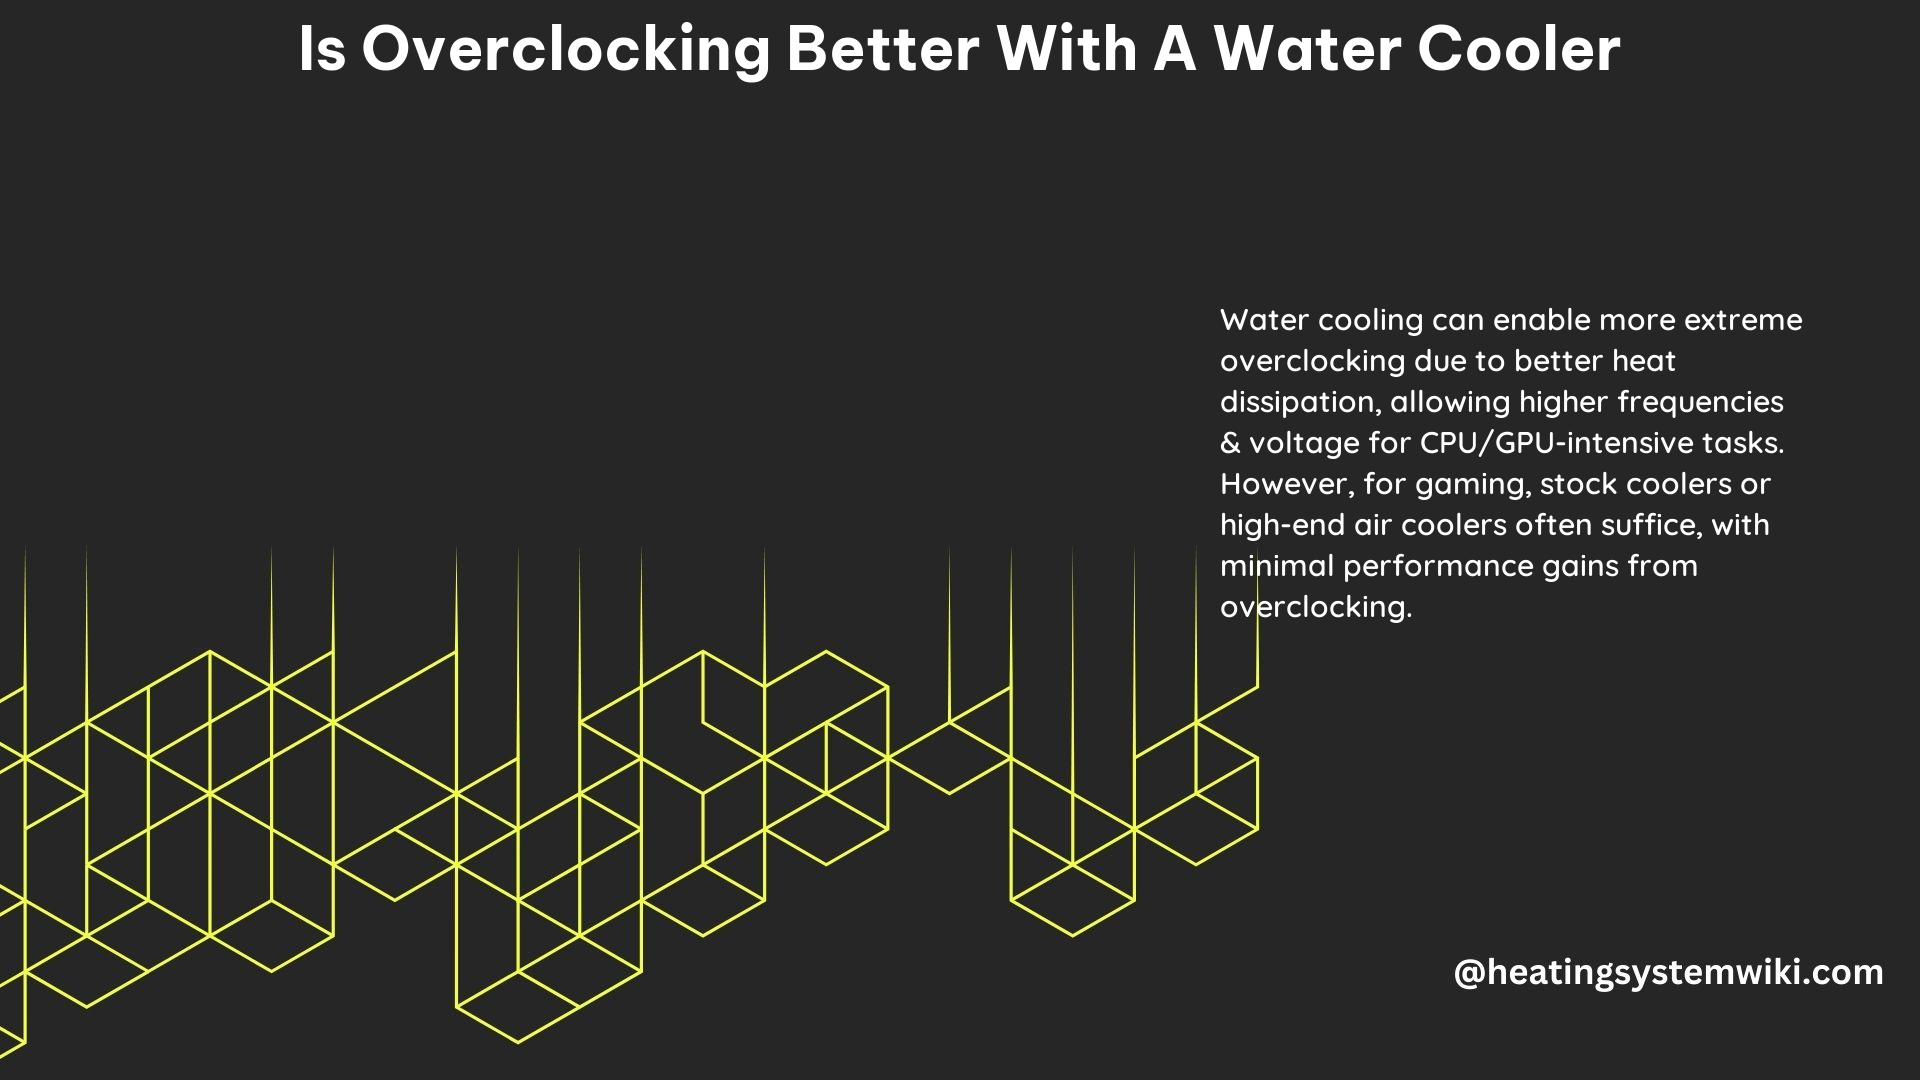 Is Overclocking Better With a Water Cooler